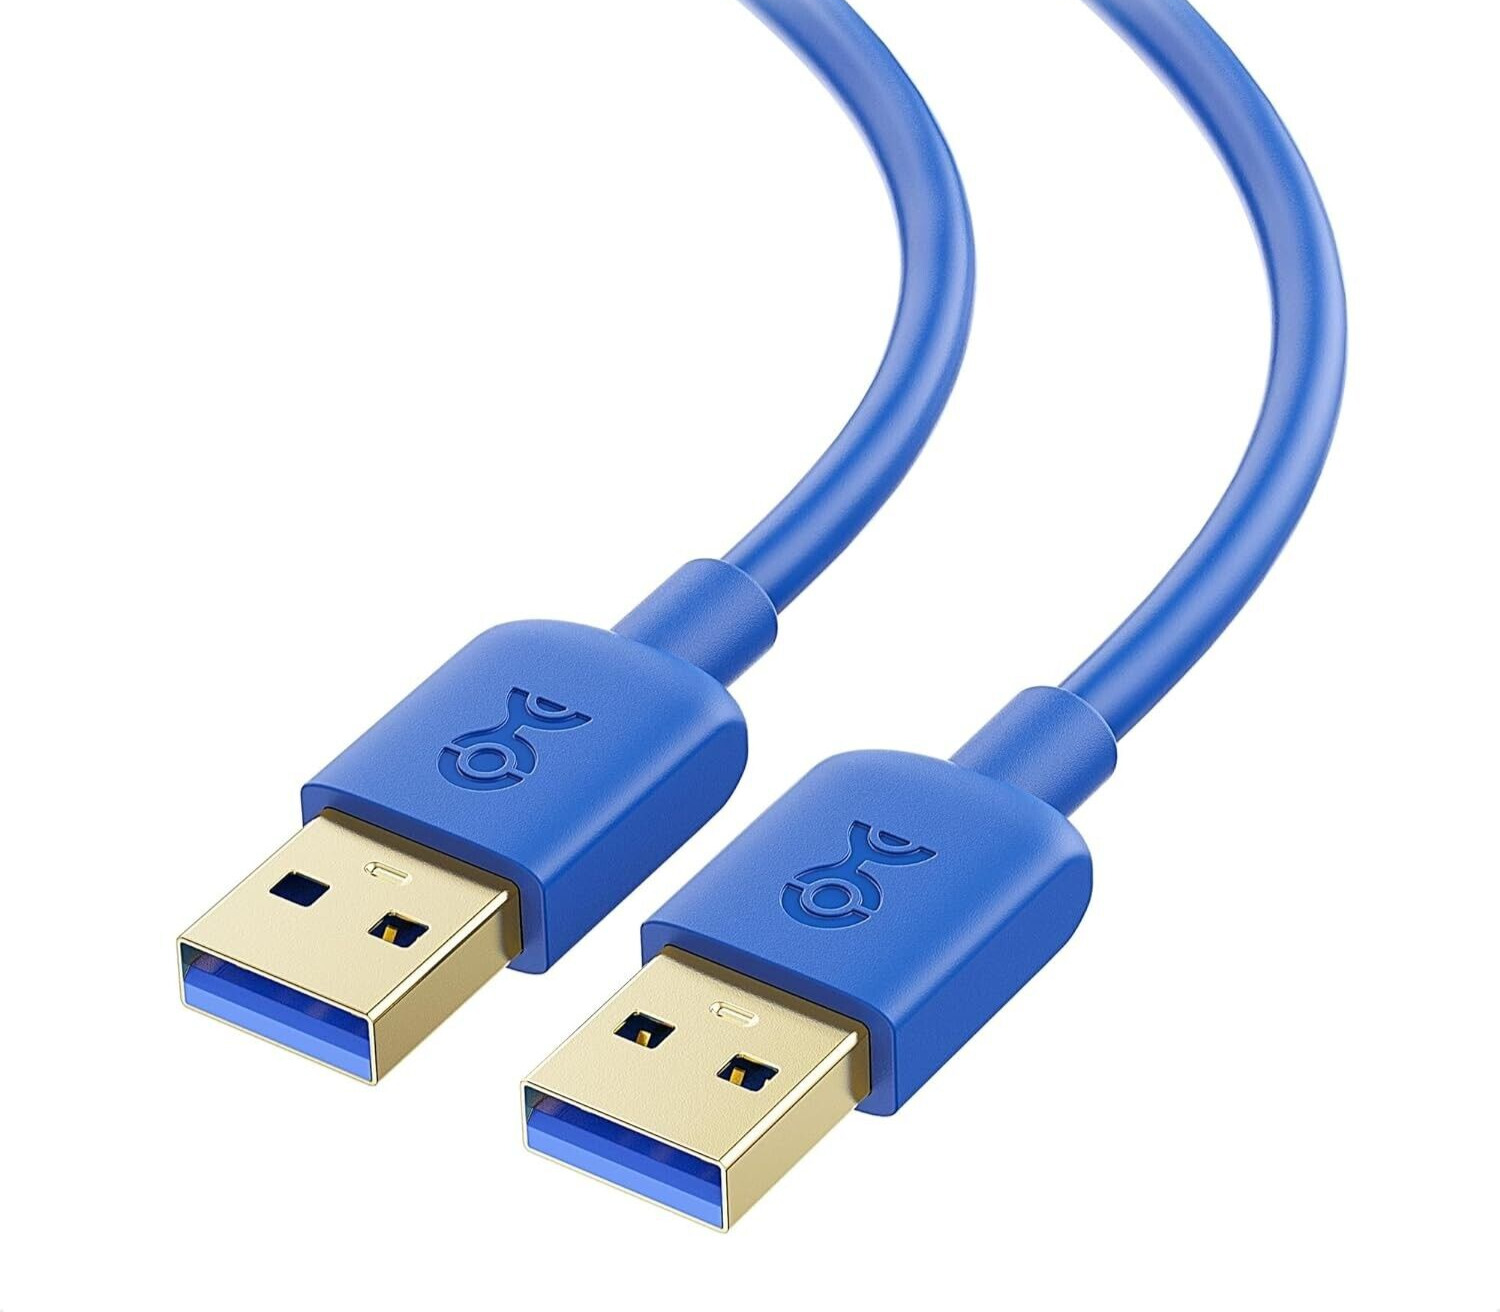 Cable Matters 2pc USB 3.0 Cable 6ft, USB A to USB A Cable/Male to Male USB Cord